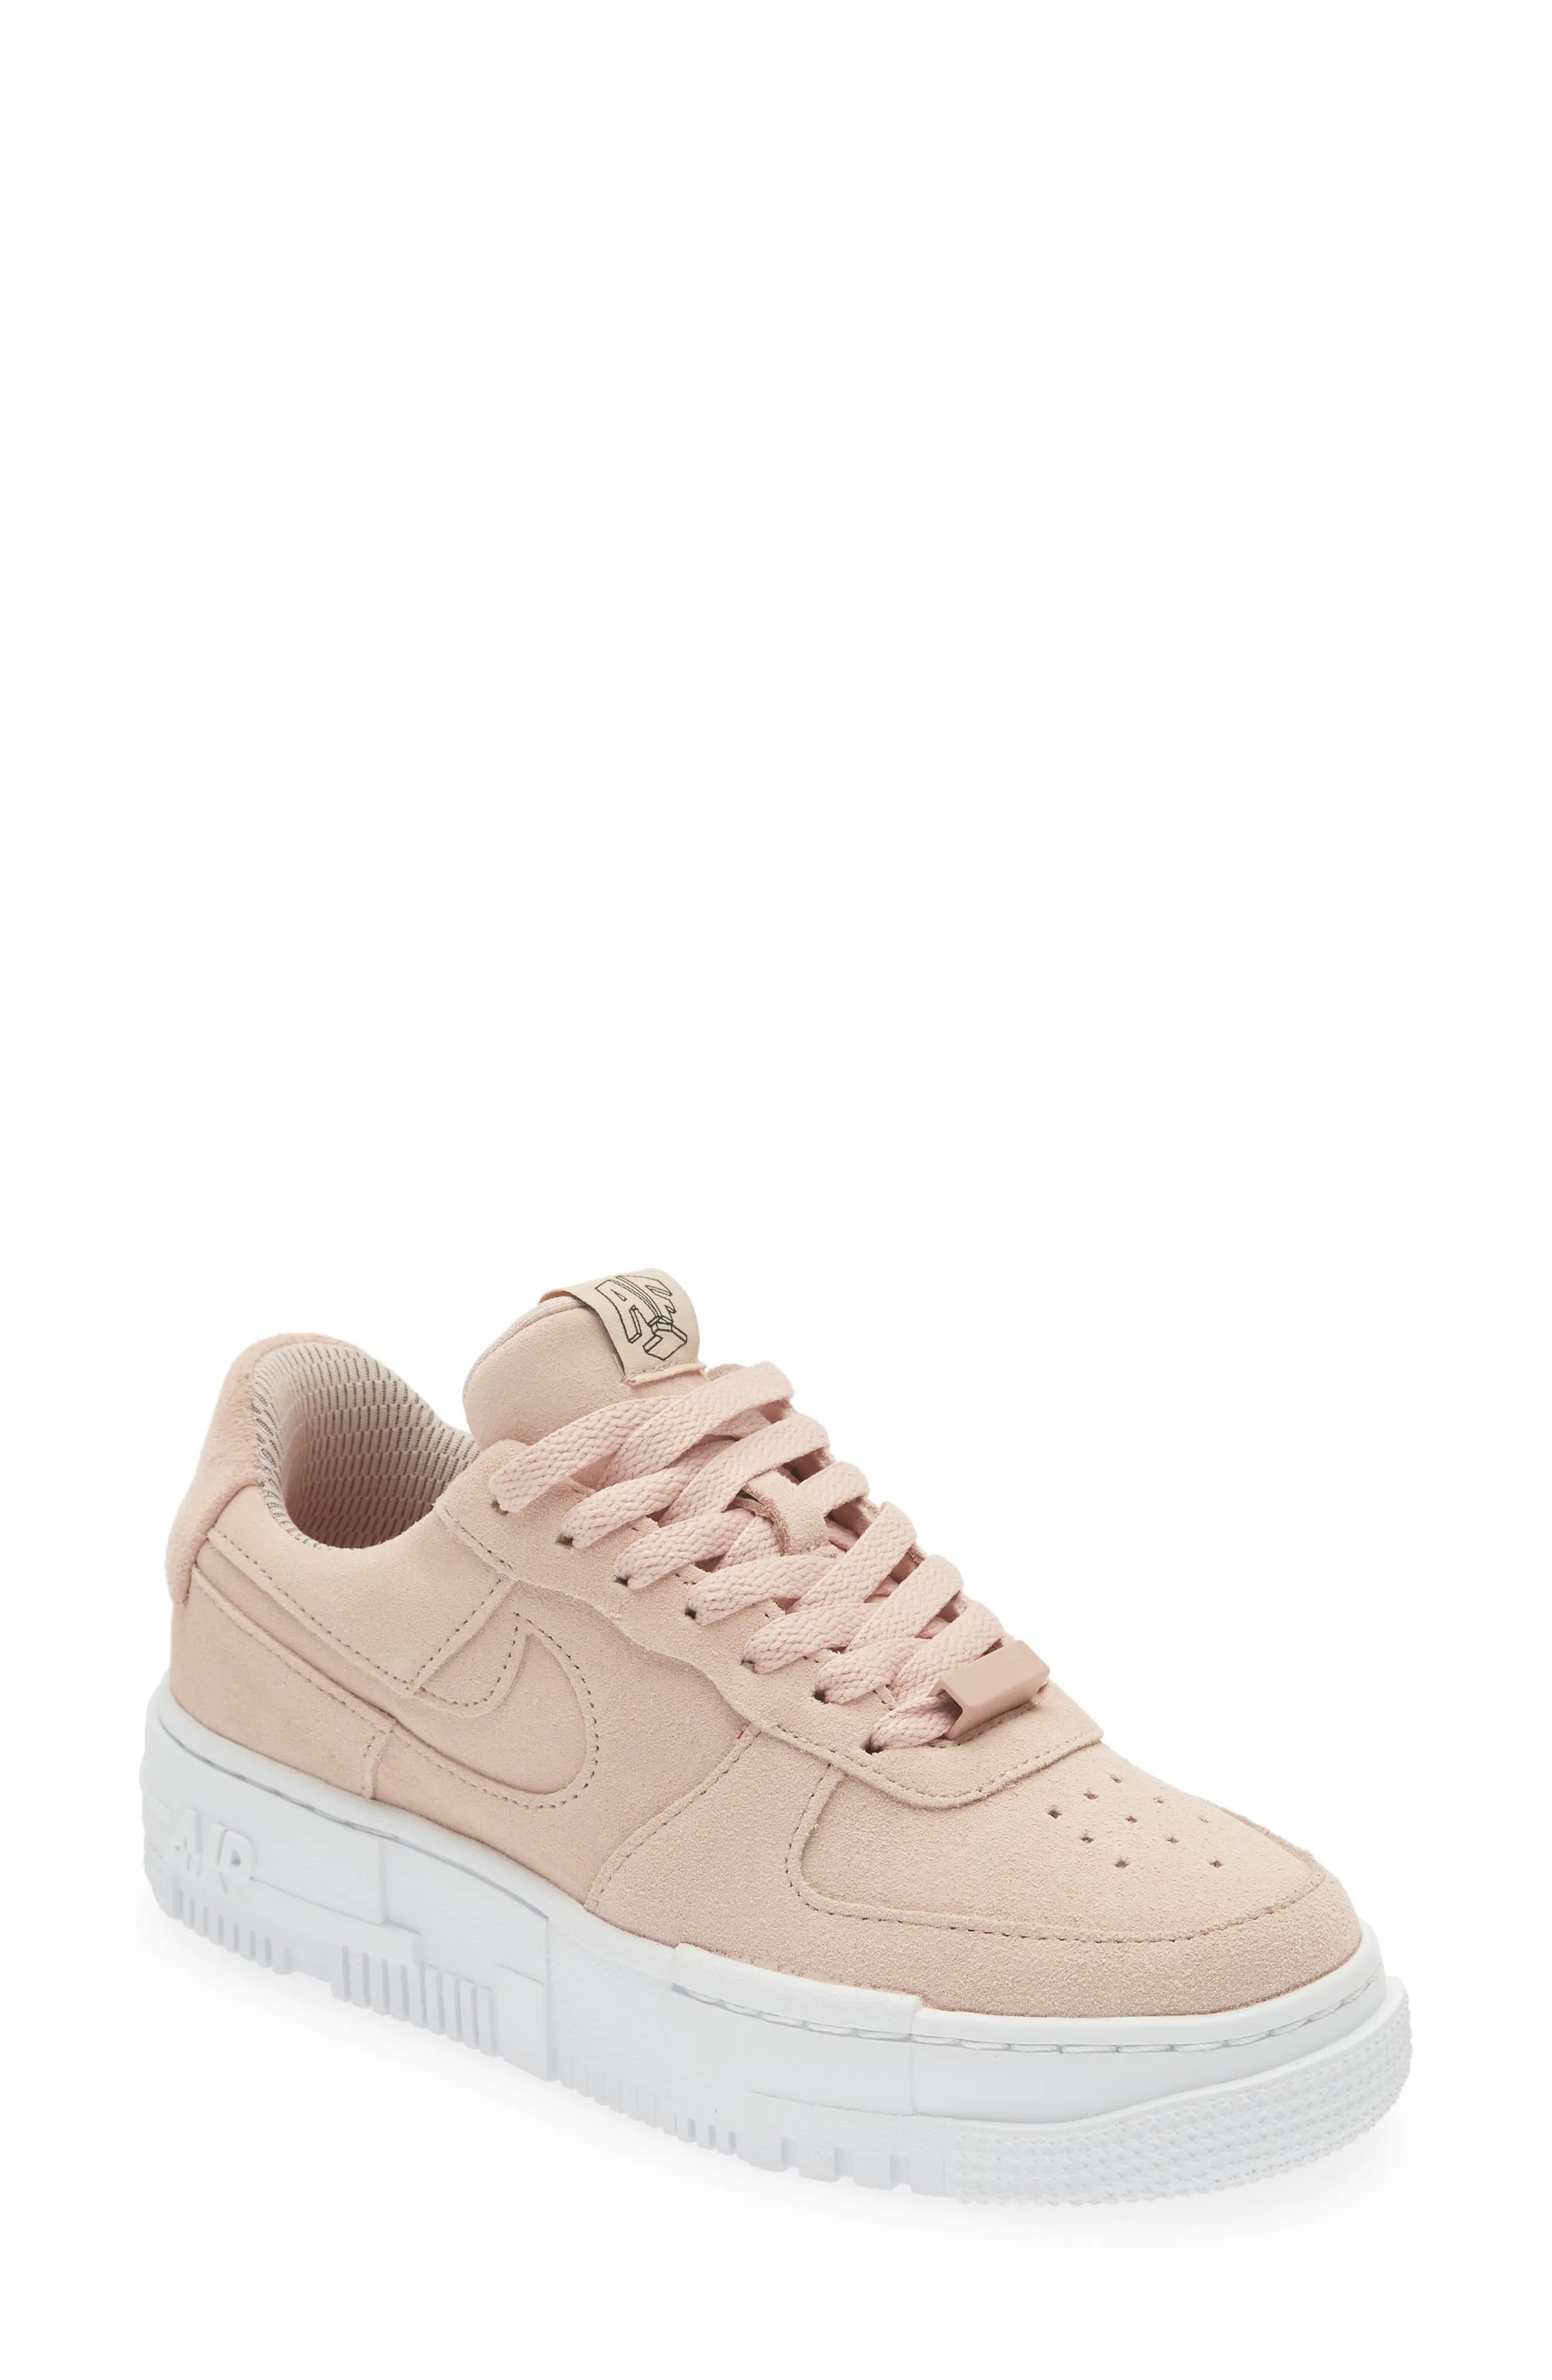 Nike Air Force 1 Pixel Sneaker in Pink Oxford/White/Black at Nordstrom, Size 6 | Nordstrom